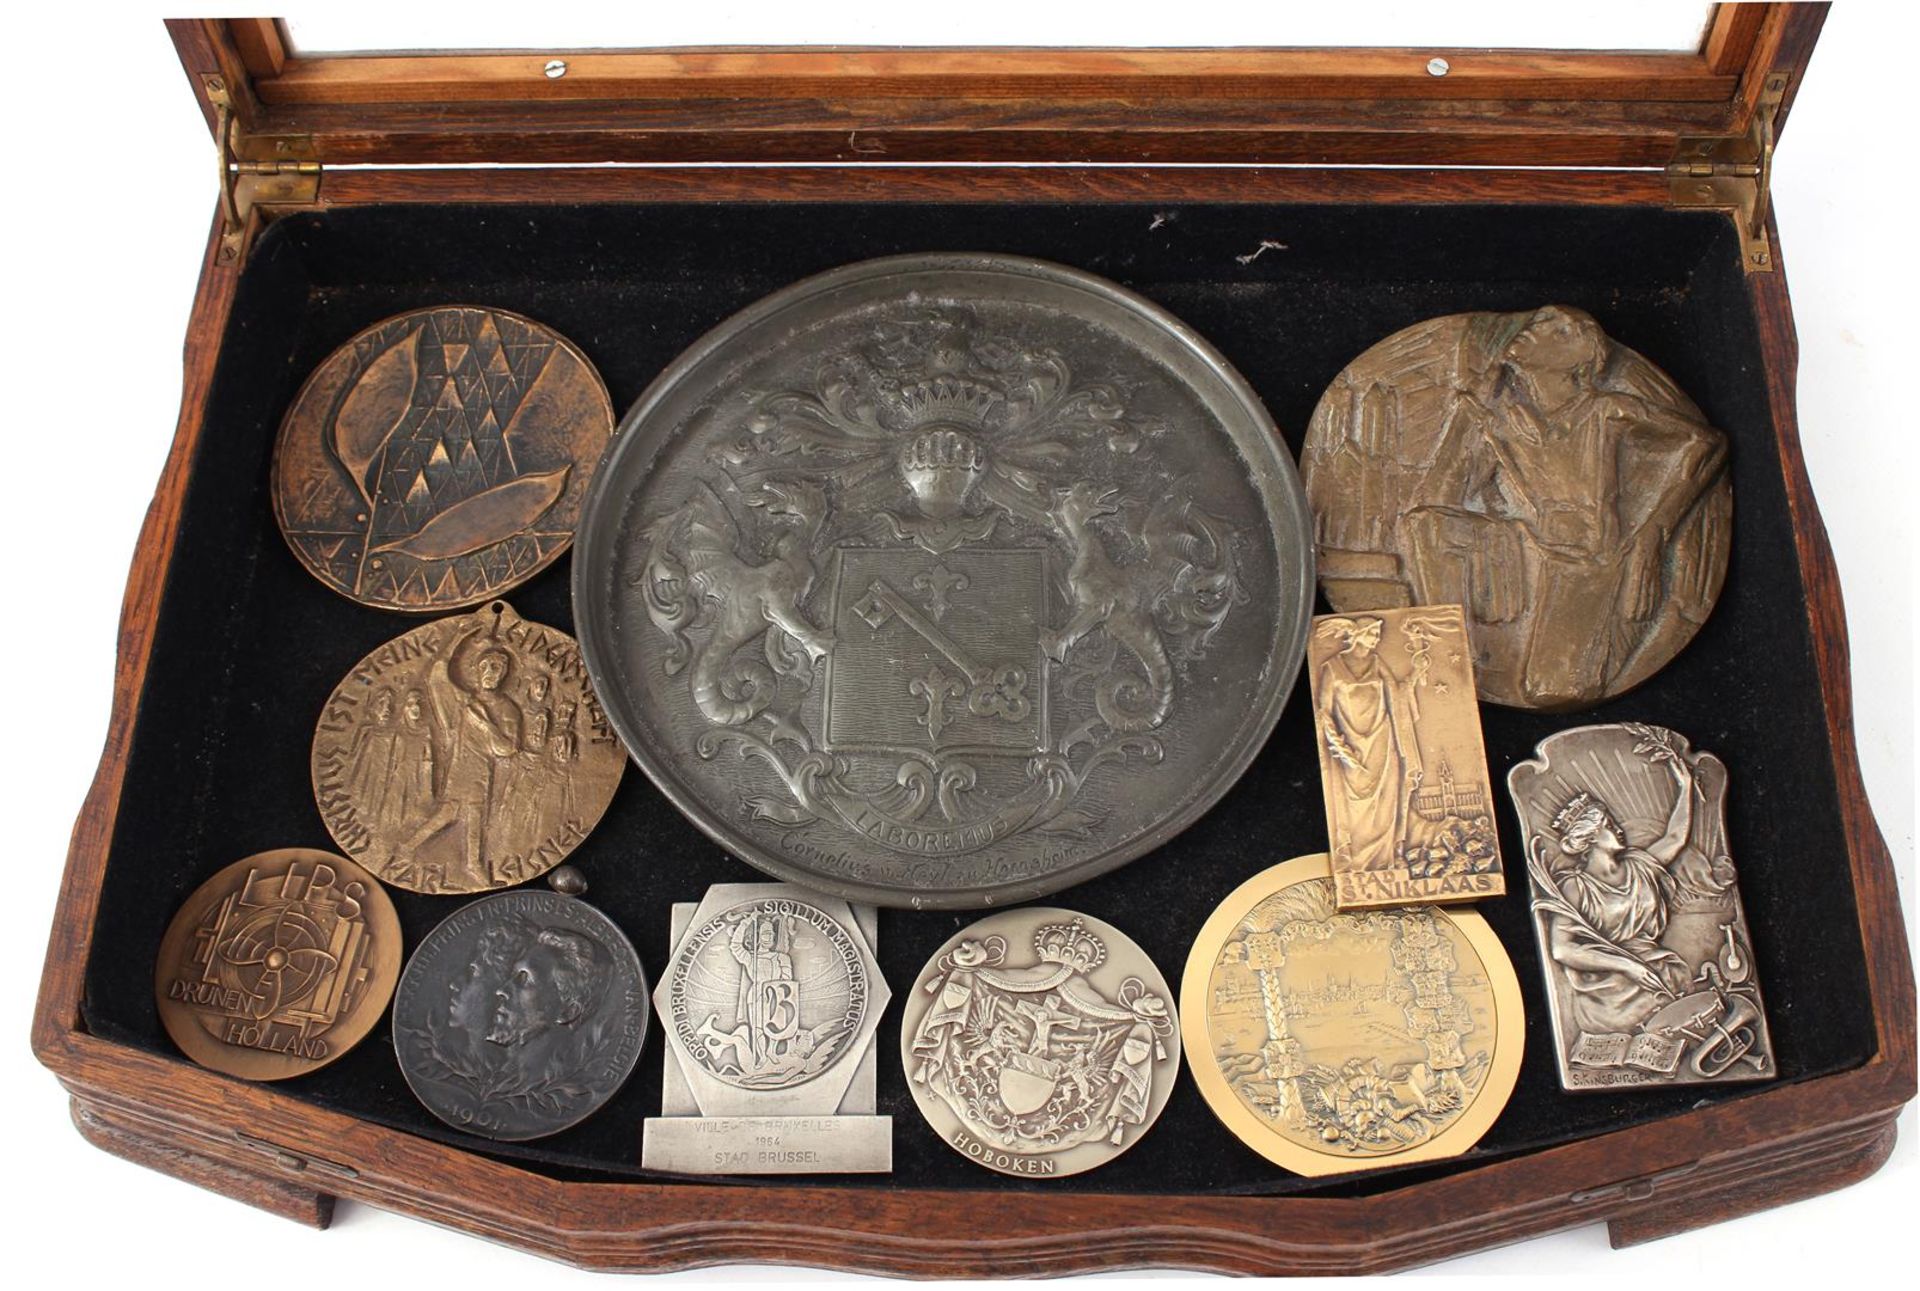 Oak collector's cabinet containing 11 medals